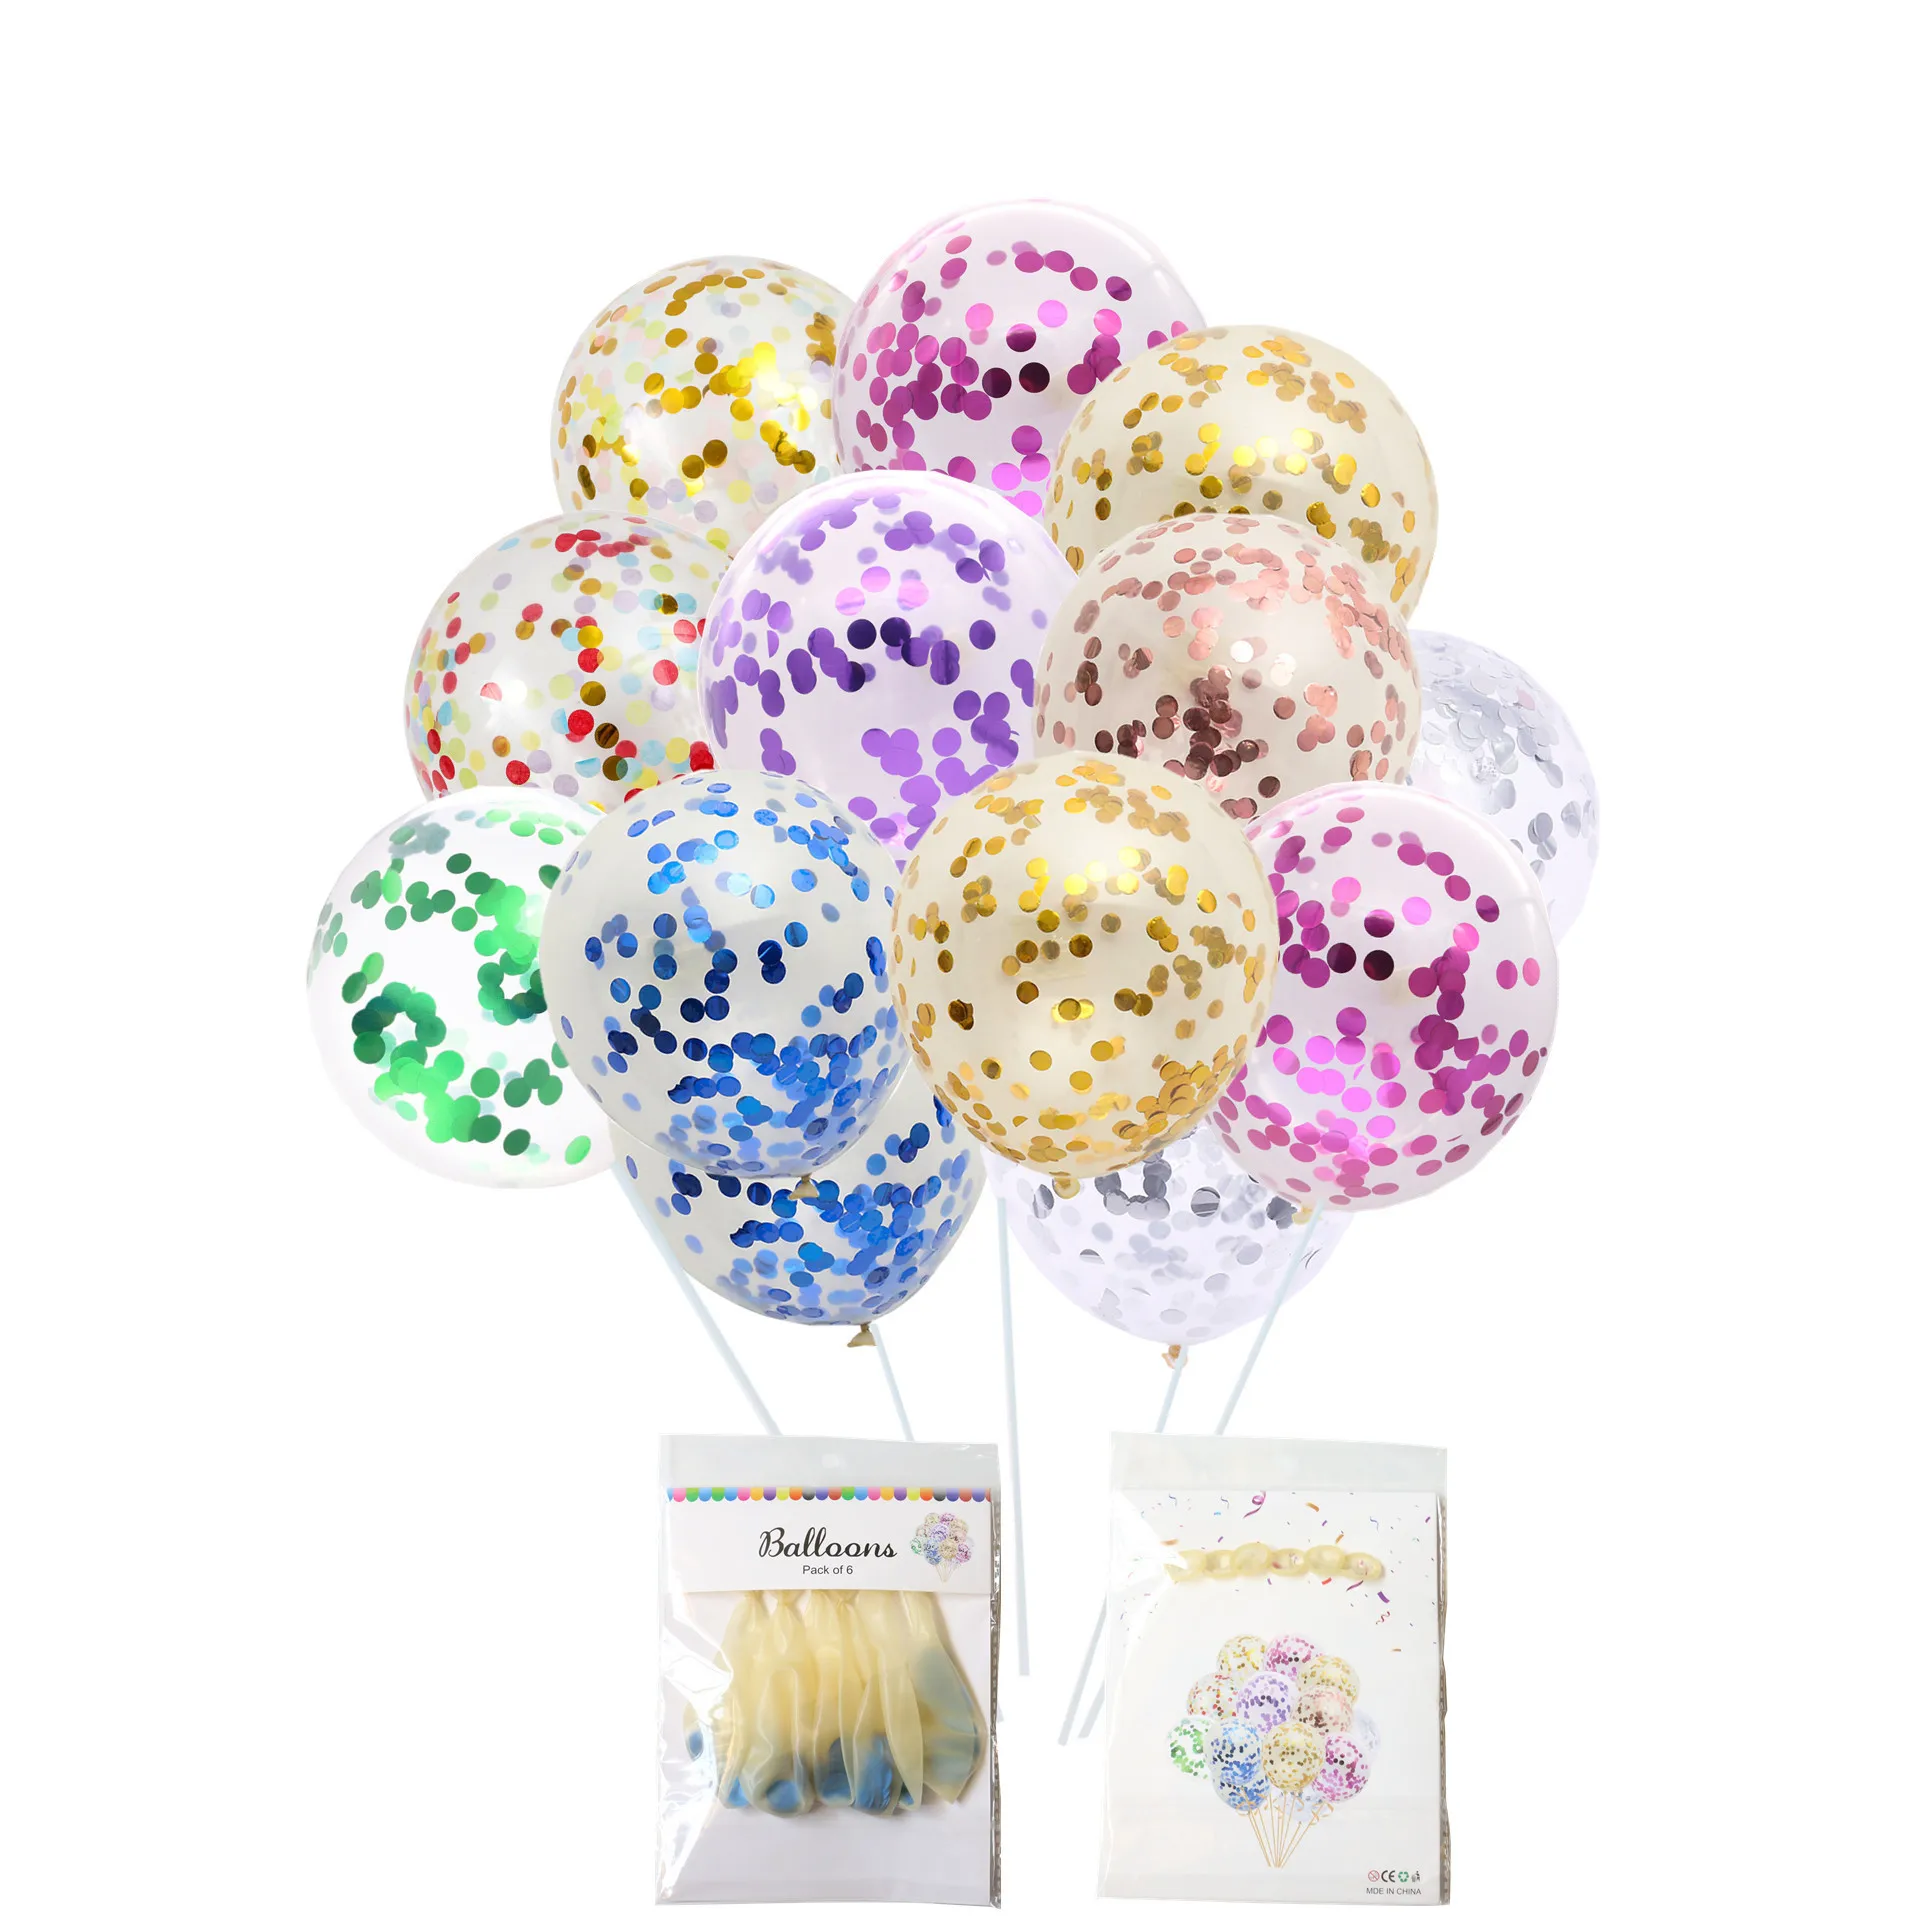 Qty 6 x 12in Clear Confetti Filled  Balloons Birthday Celebration Party Supplies 